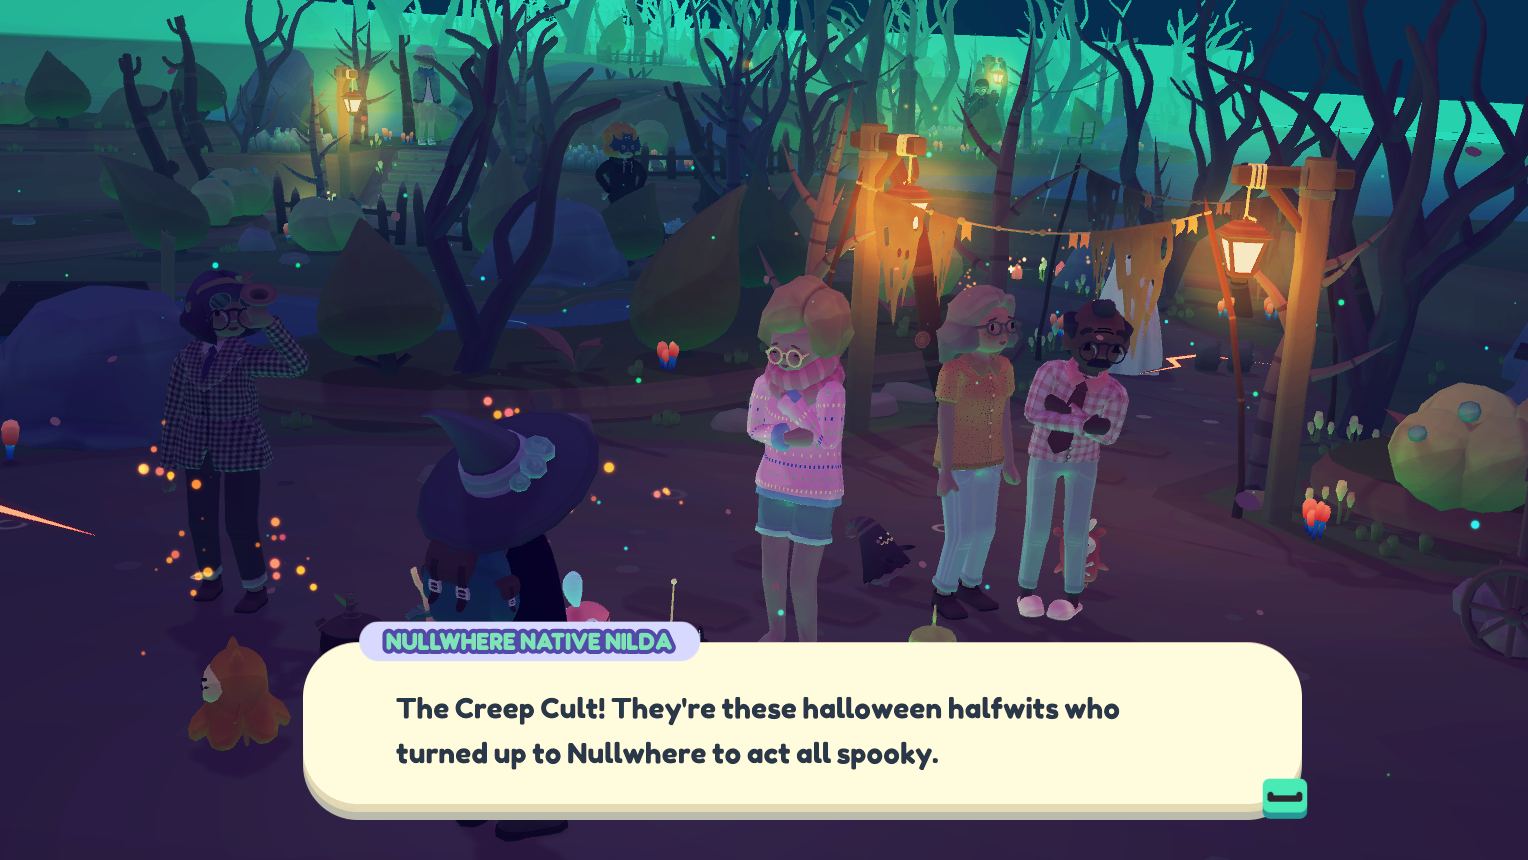 Ooblets download the new for apple